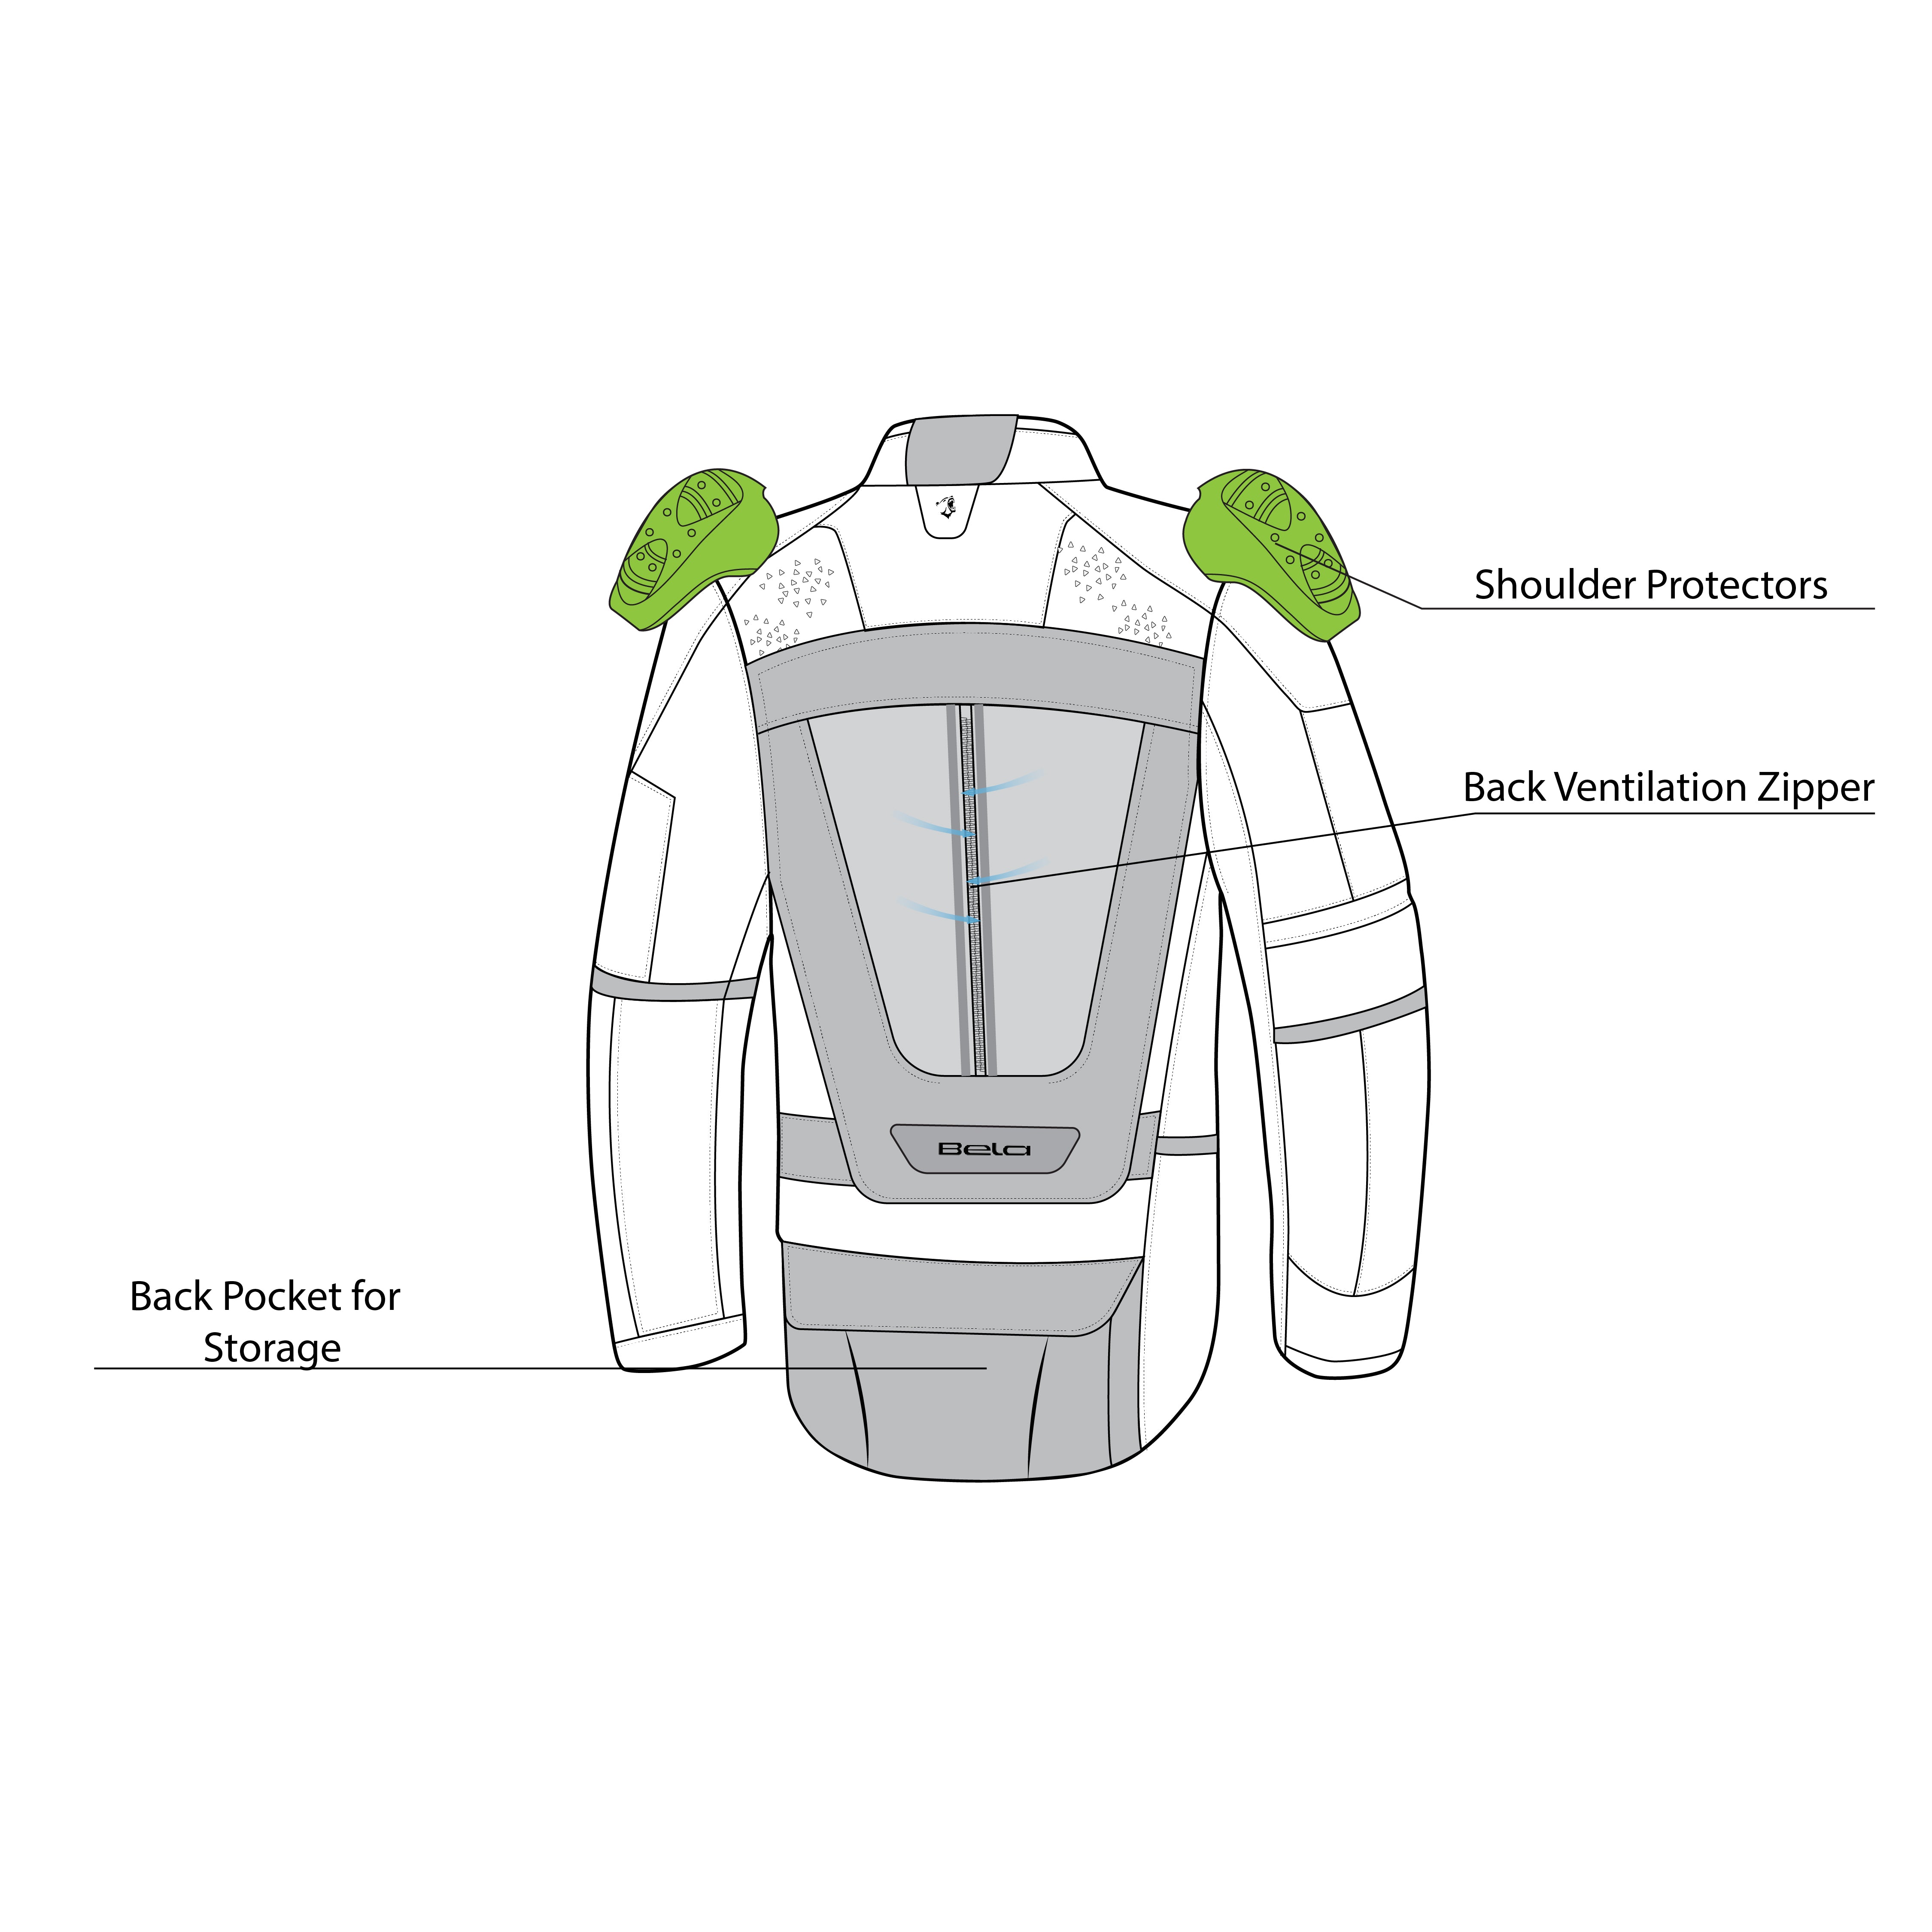 infographic sketch bela crossroad extreme wr the winter jacket ice-gray and black back shoulder view